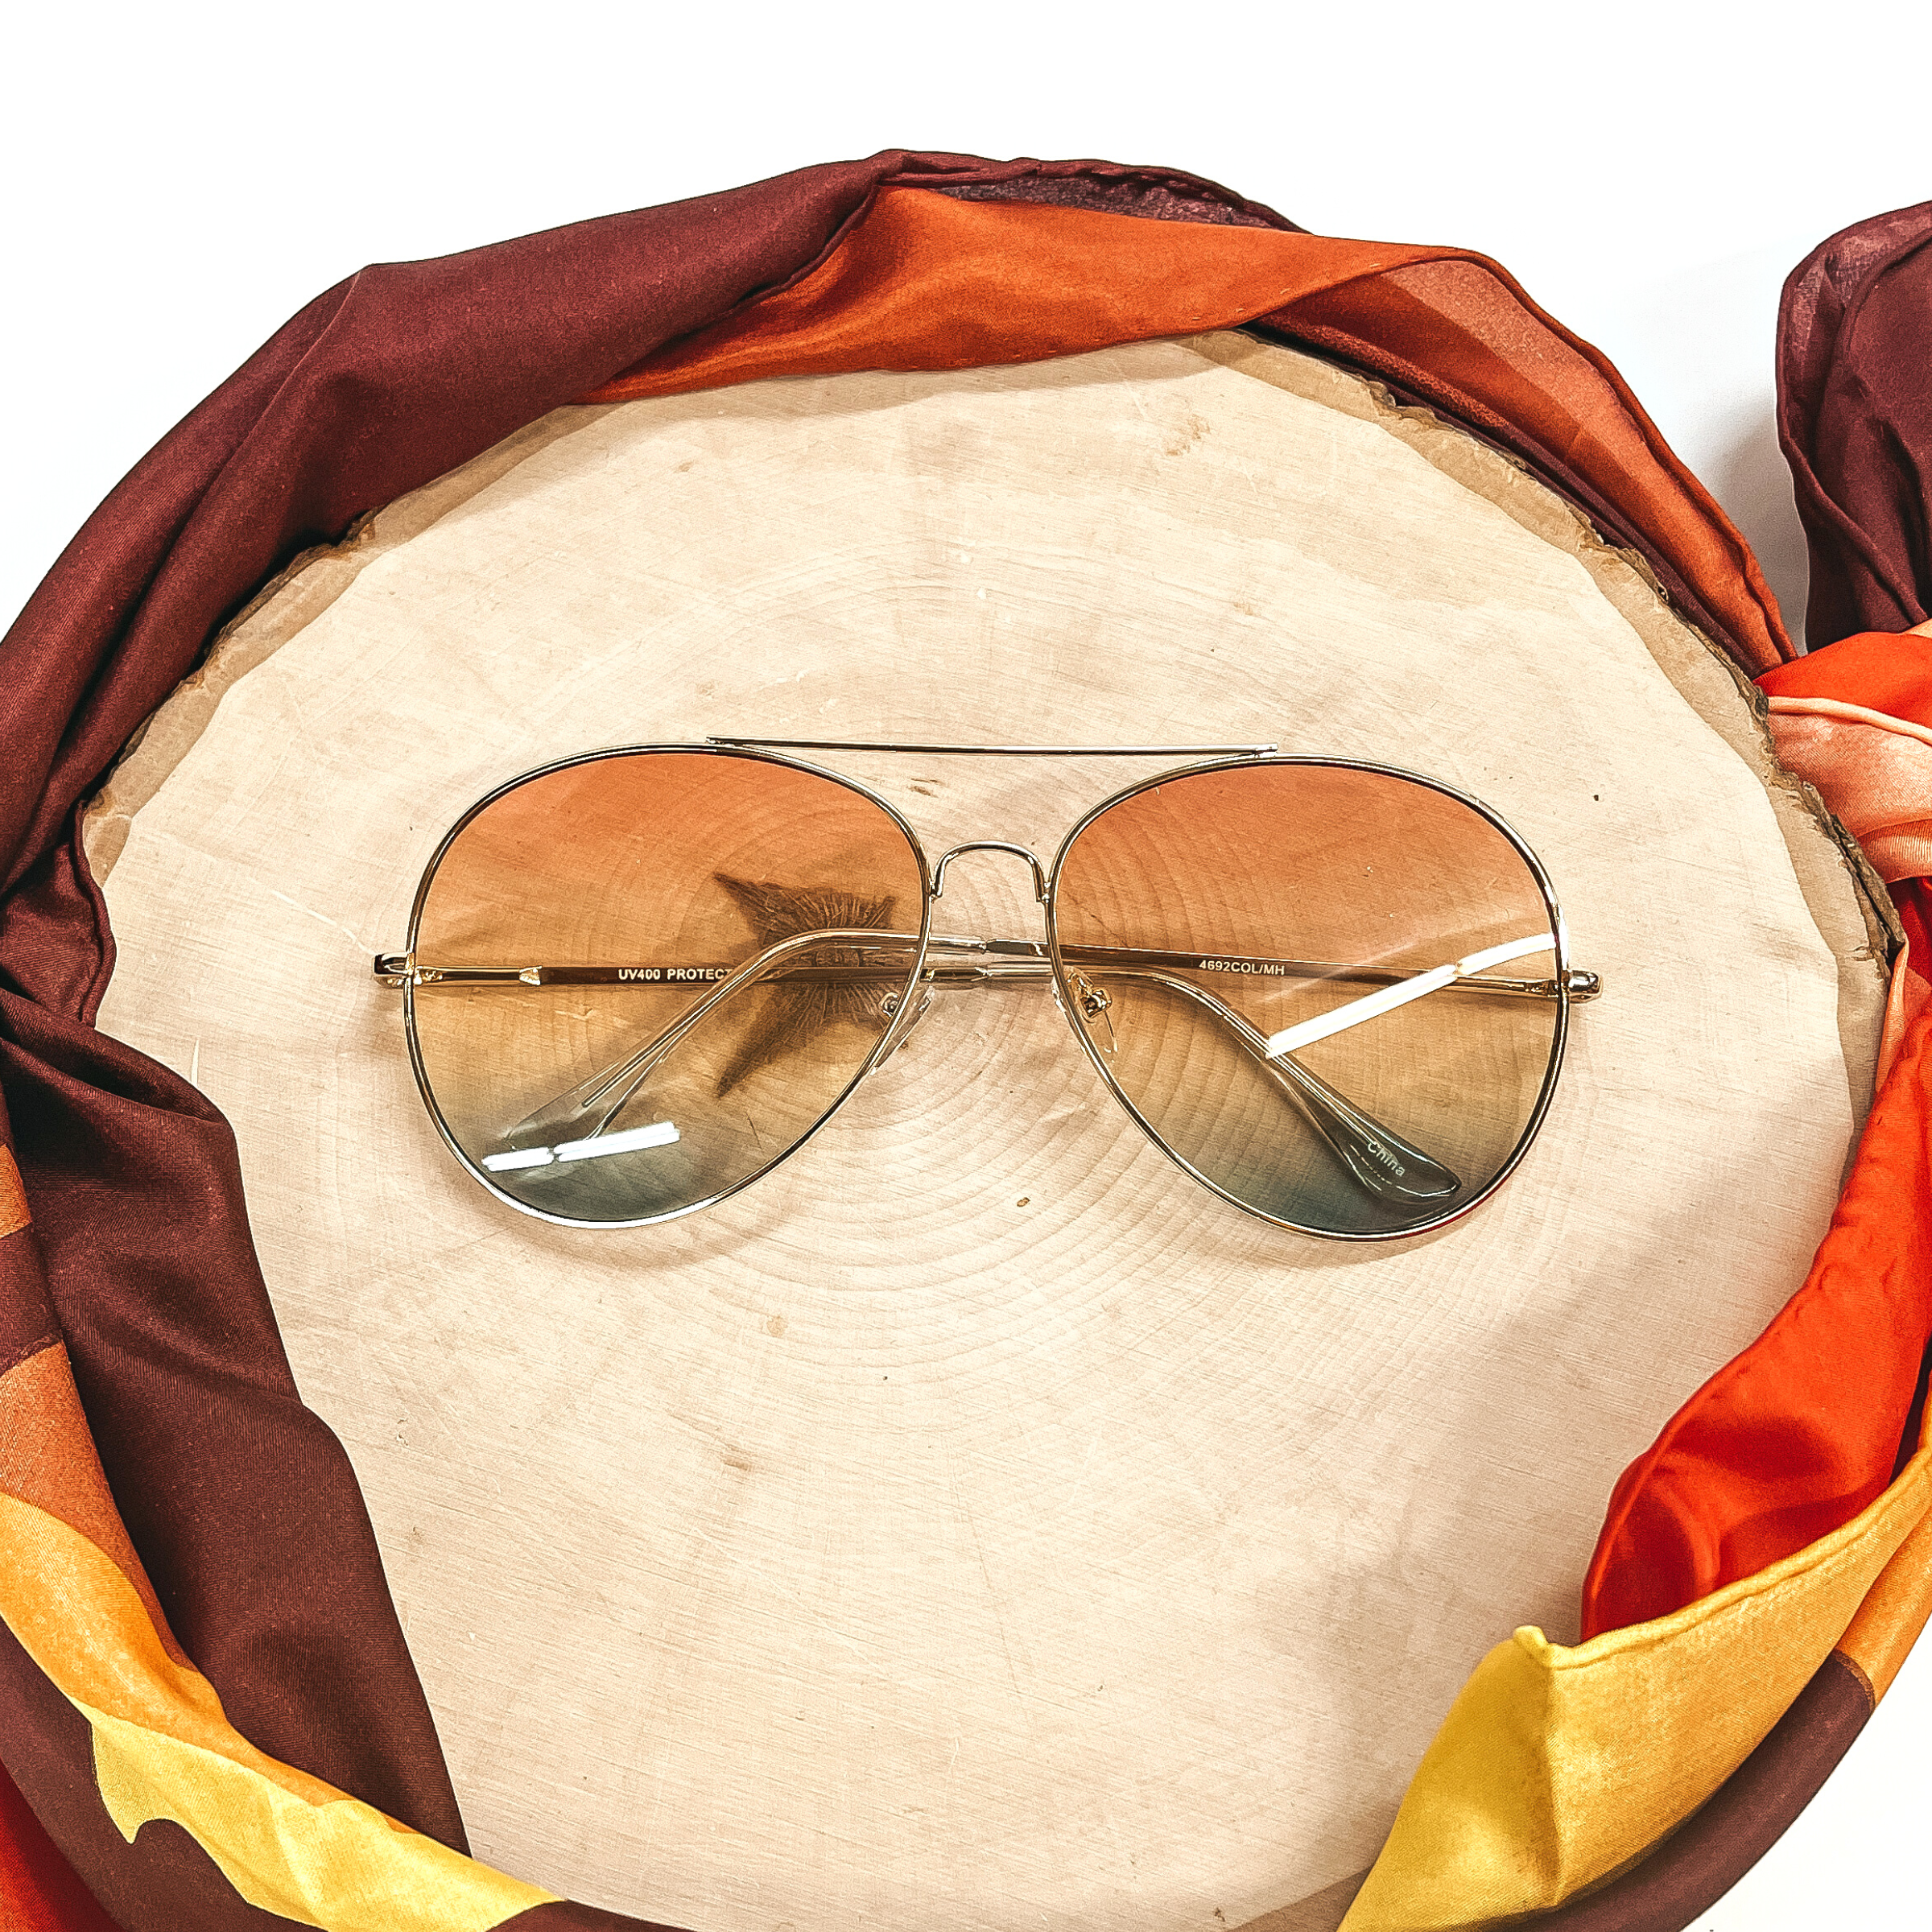 These are aviator style sunglasses with coral/orange and green gradient lenses and a gold tone outline/frame. These sunglasses are taken on top of a wooden slate and a white background. There is a brown,orange, and yellow wild rag aorund the wooden slate as decor.